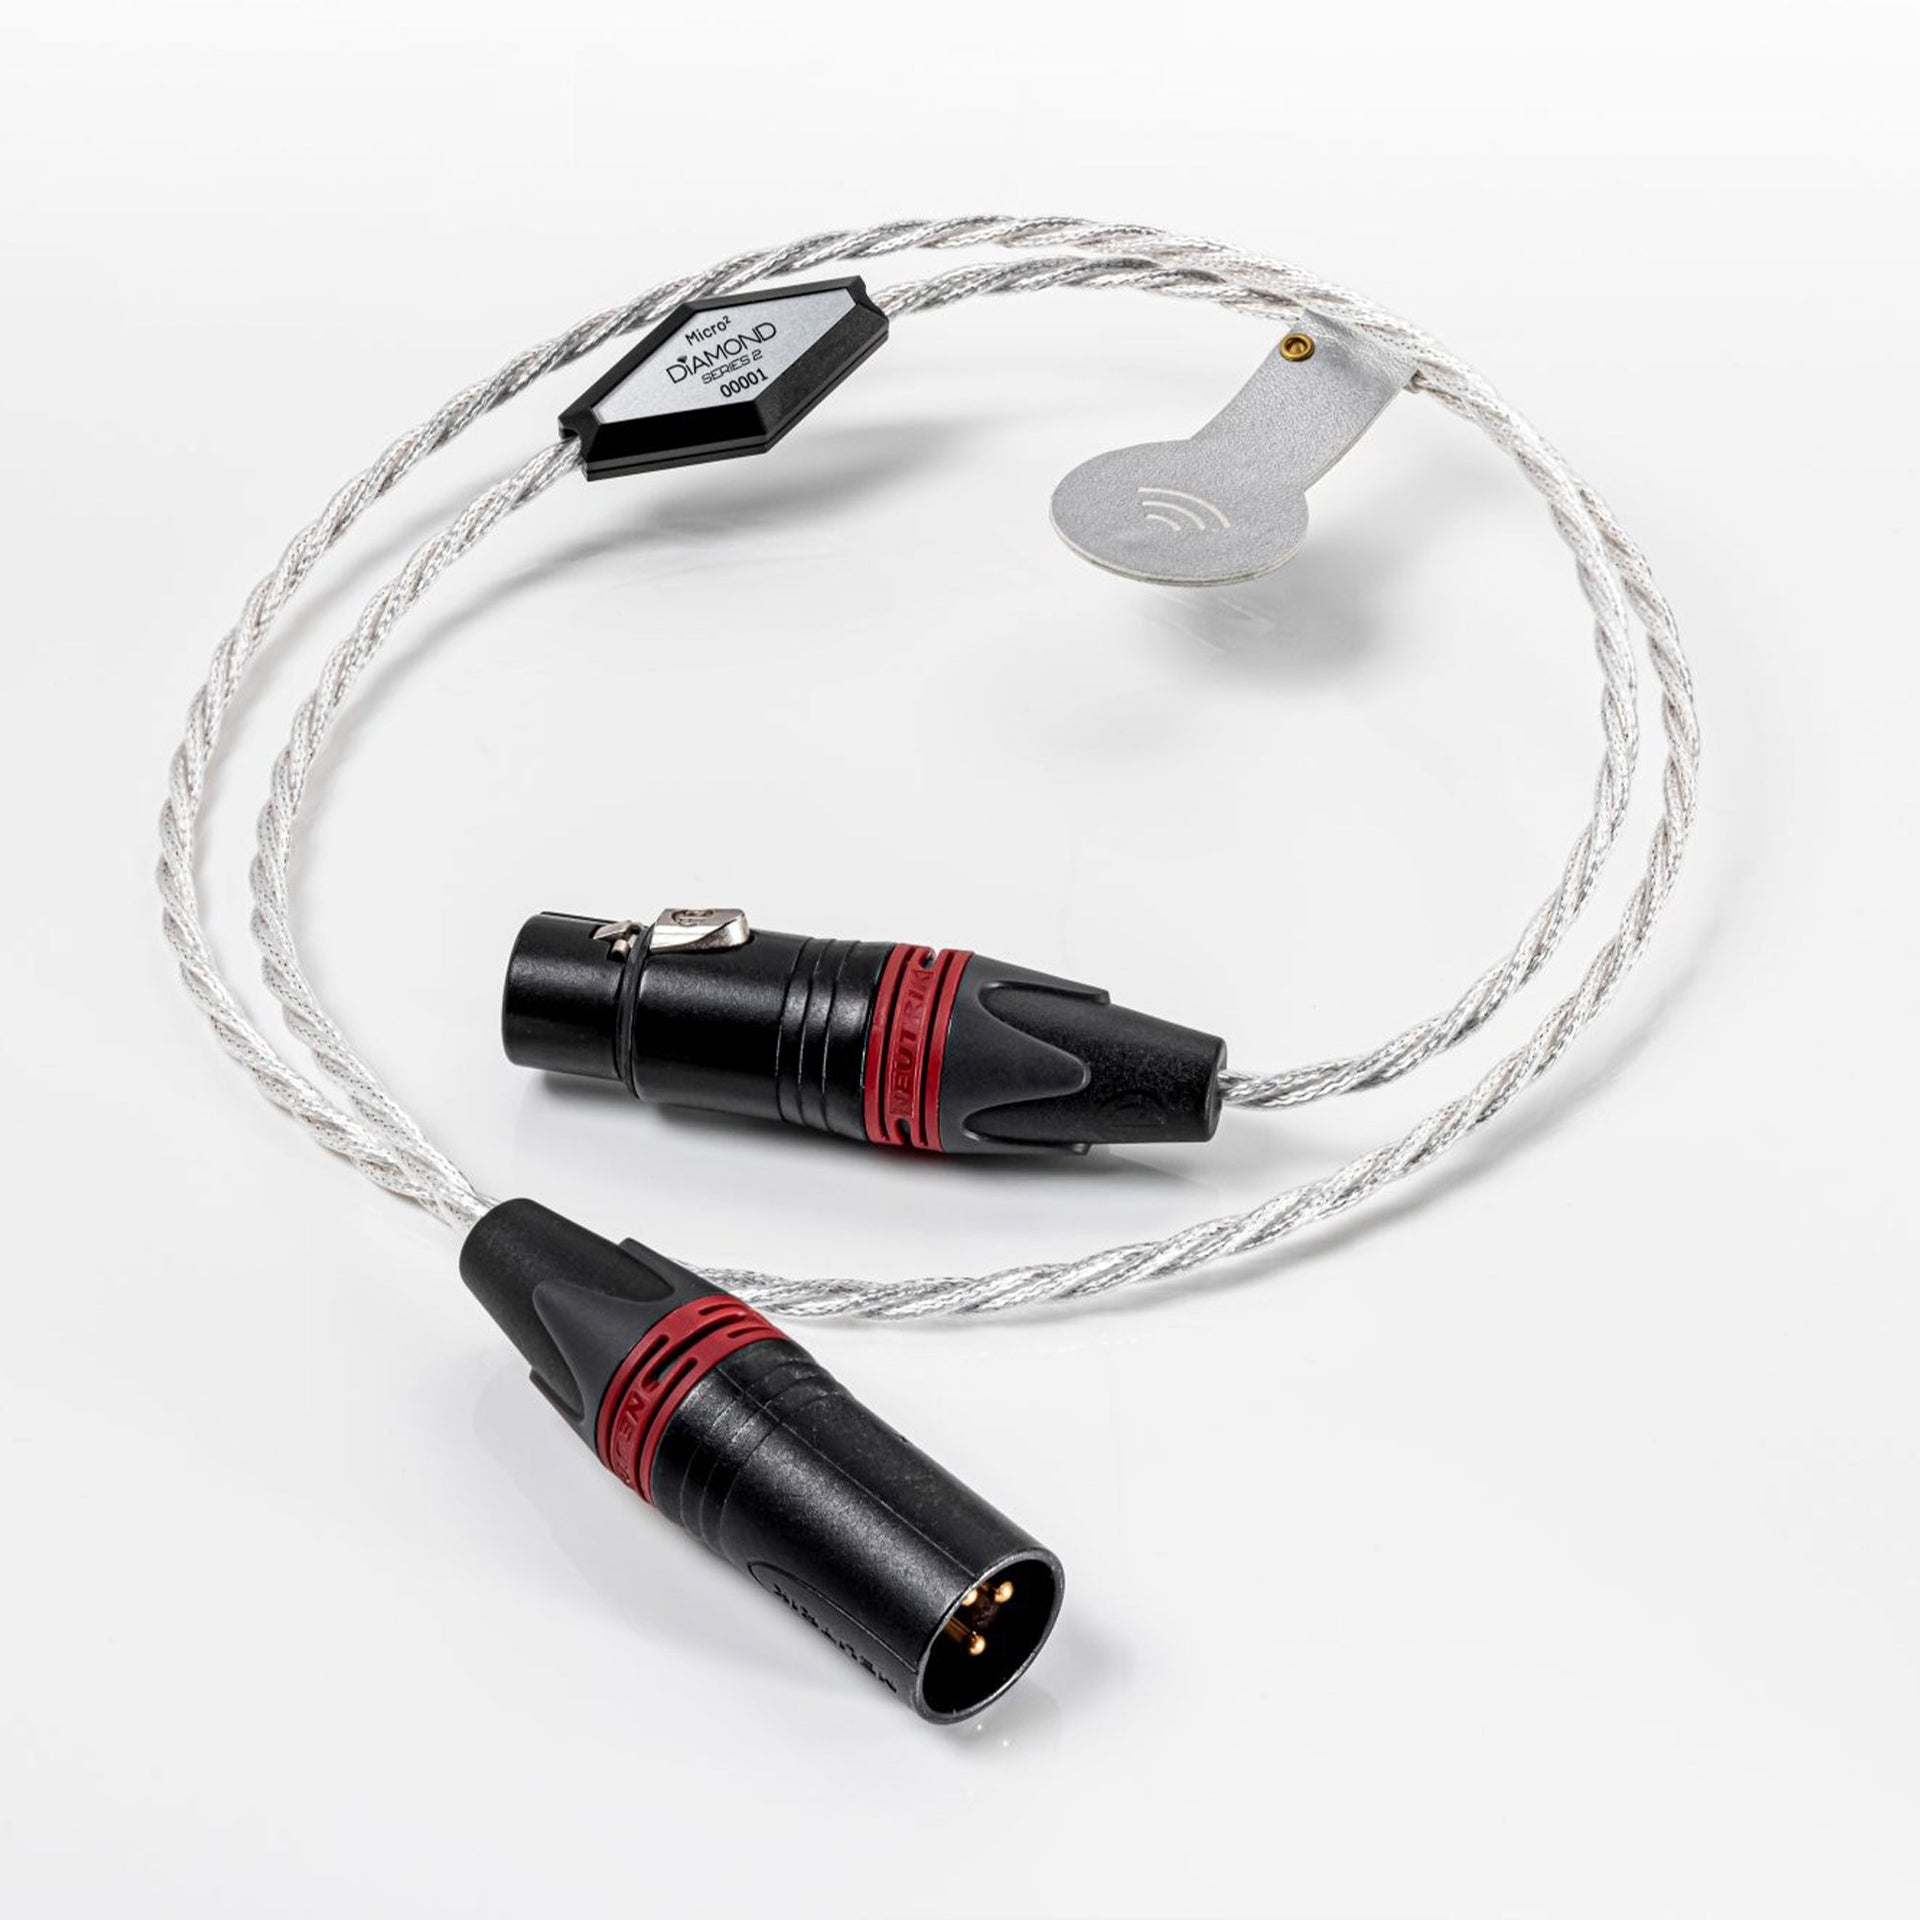 V Series Audio Interconnect Cable 2.0m